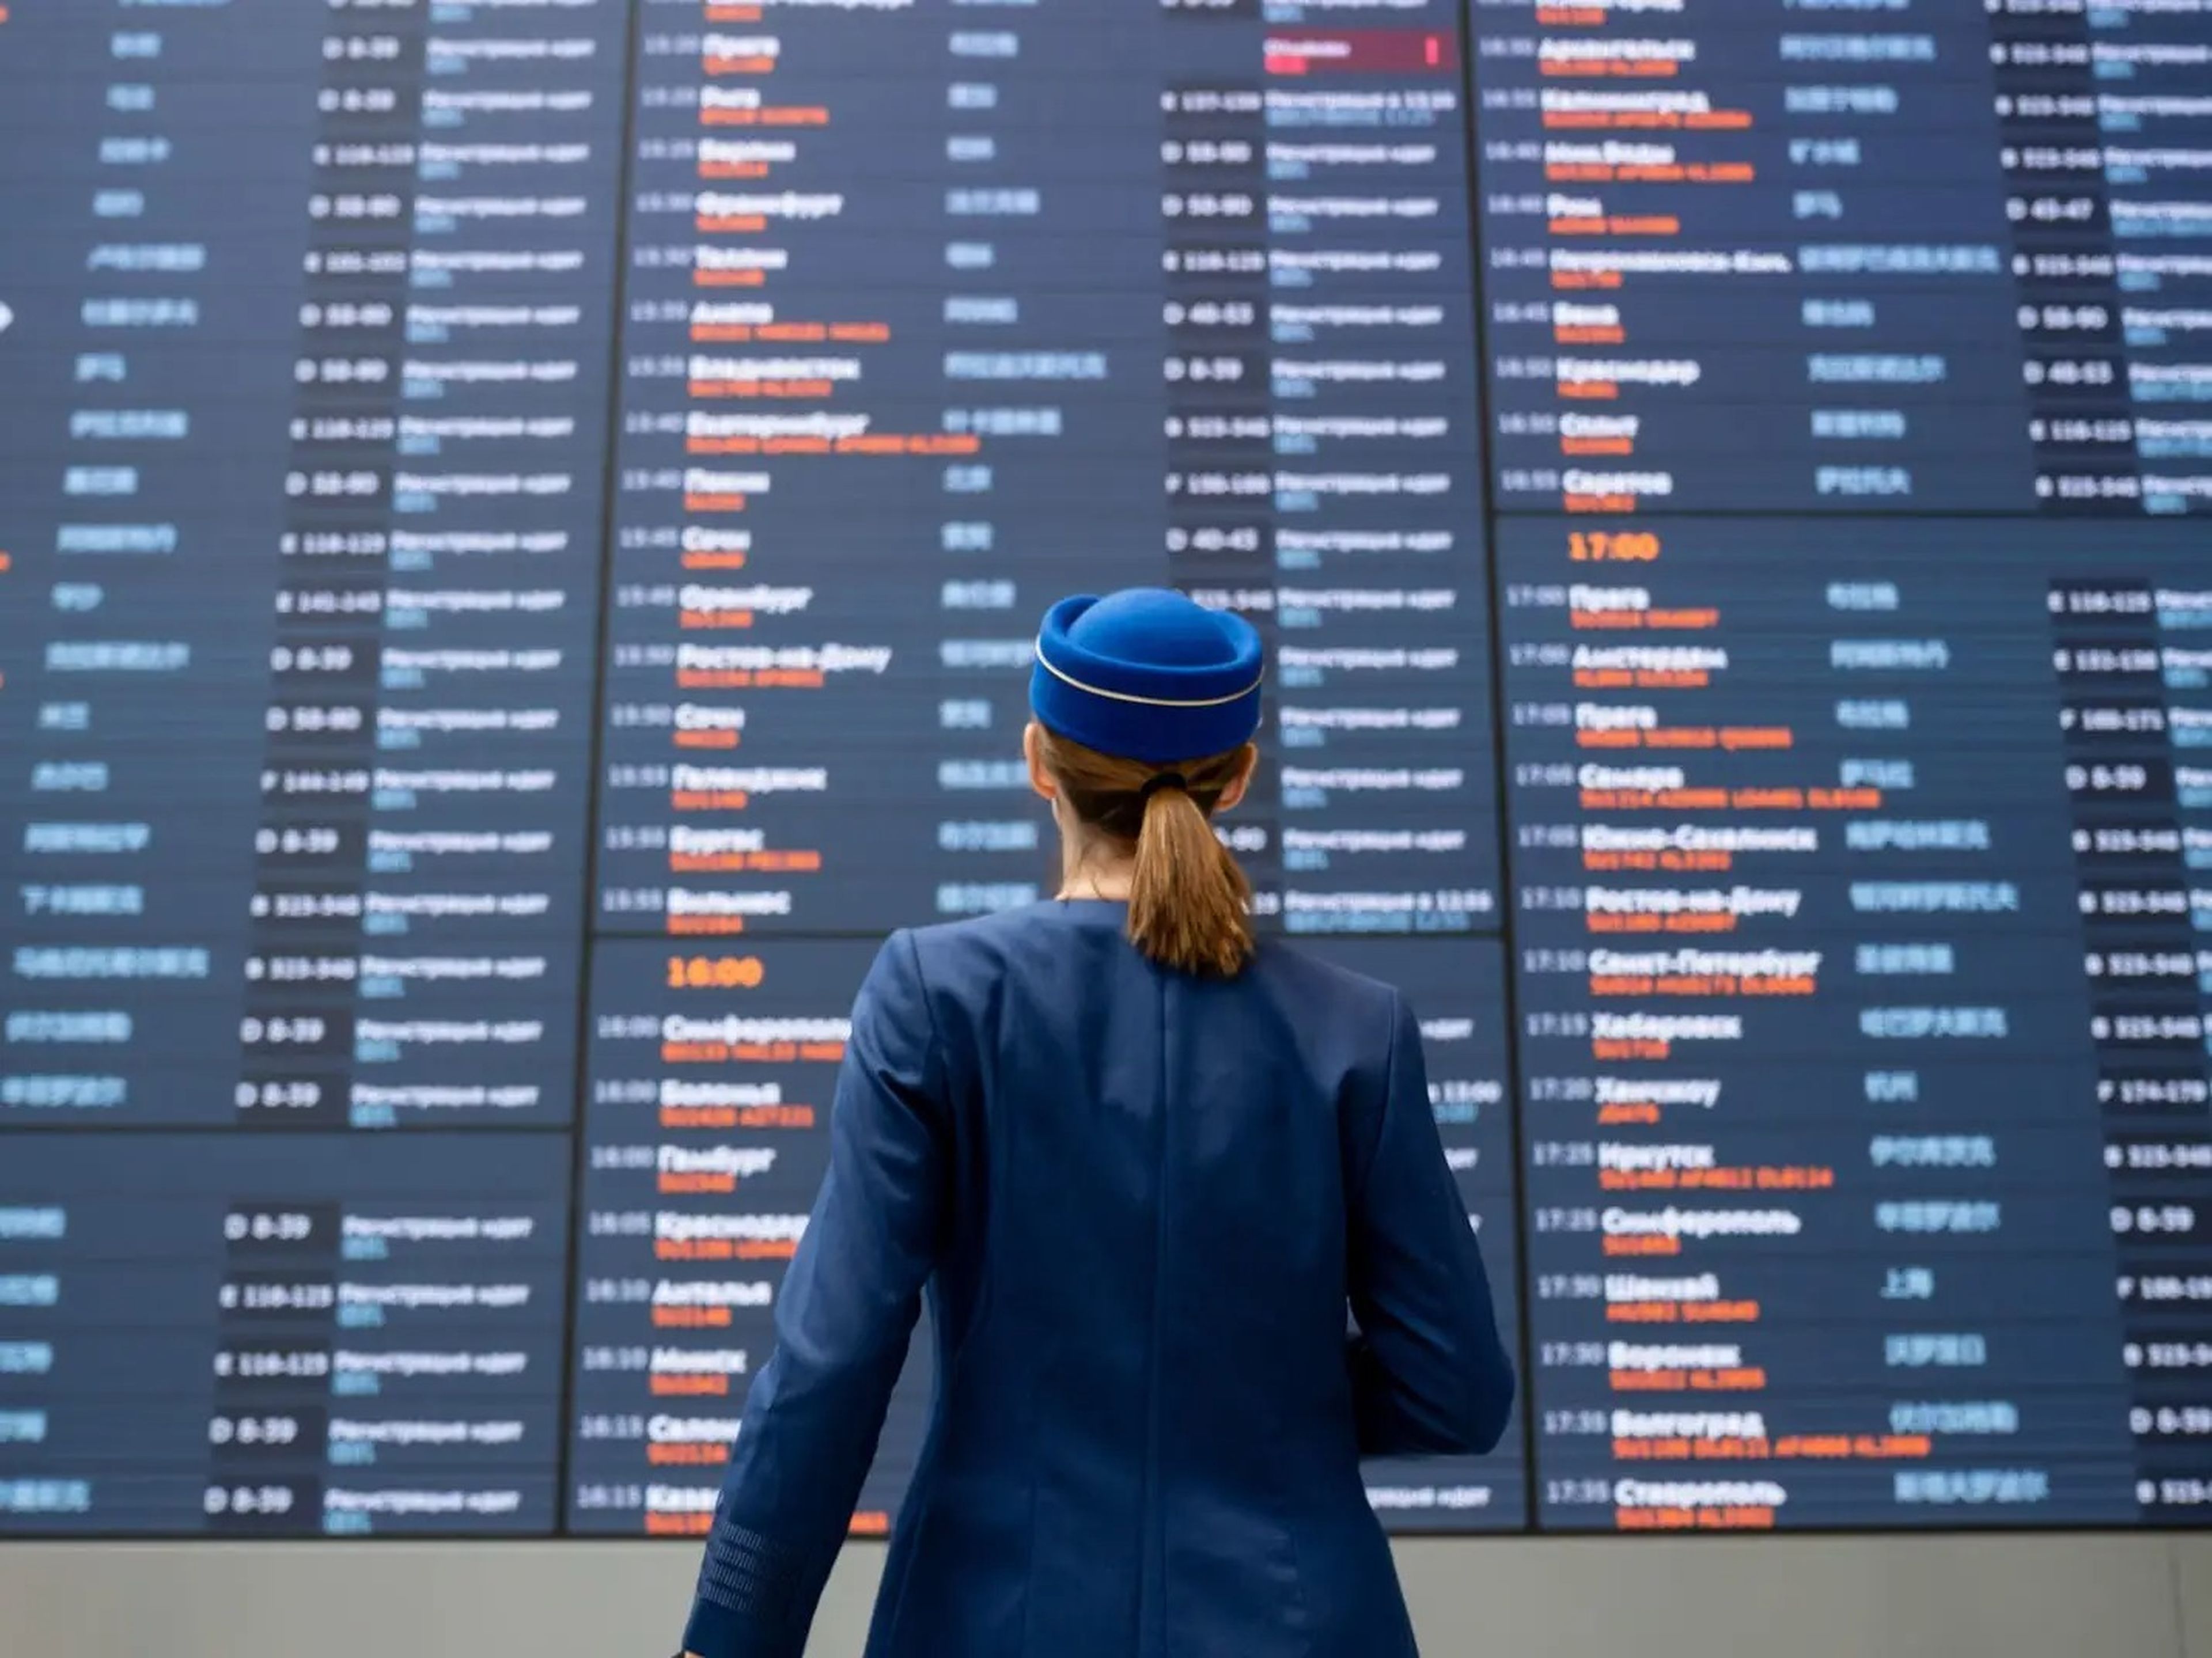 A flight attendant with a blue hat and blazer looking at a wall of flight schedules at an airport